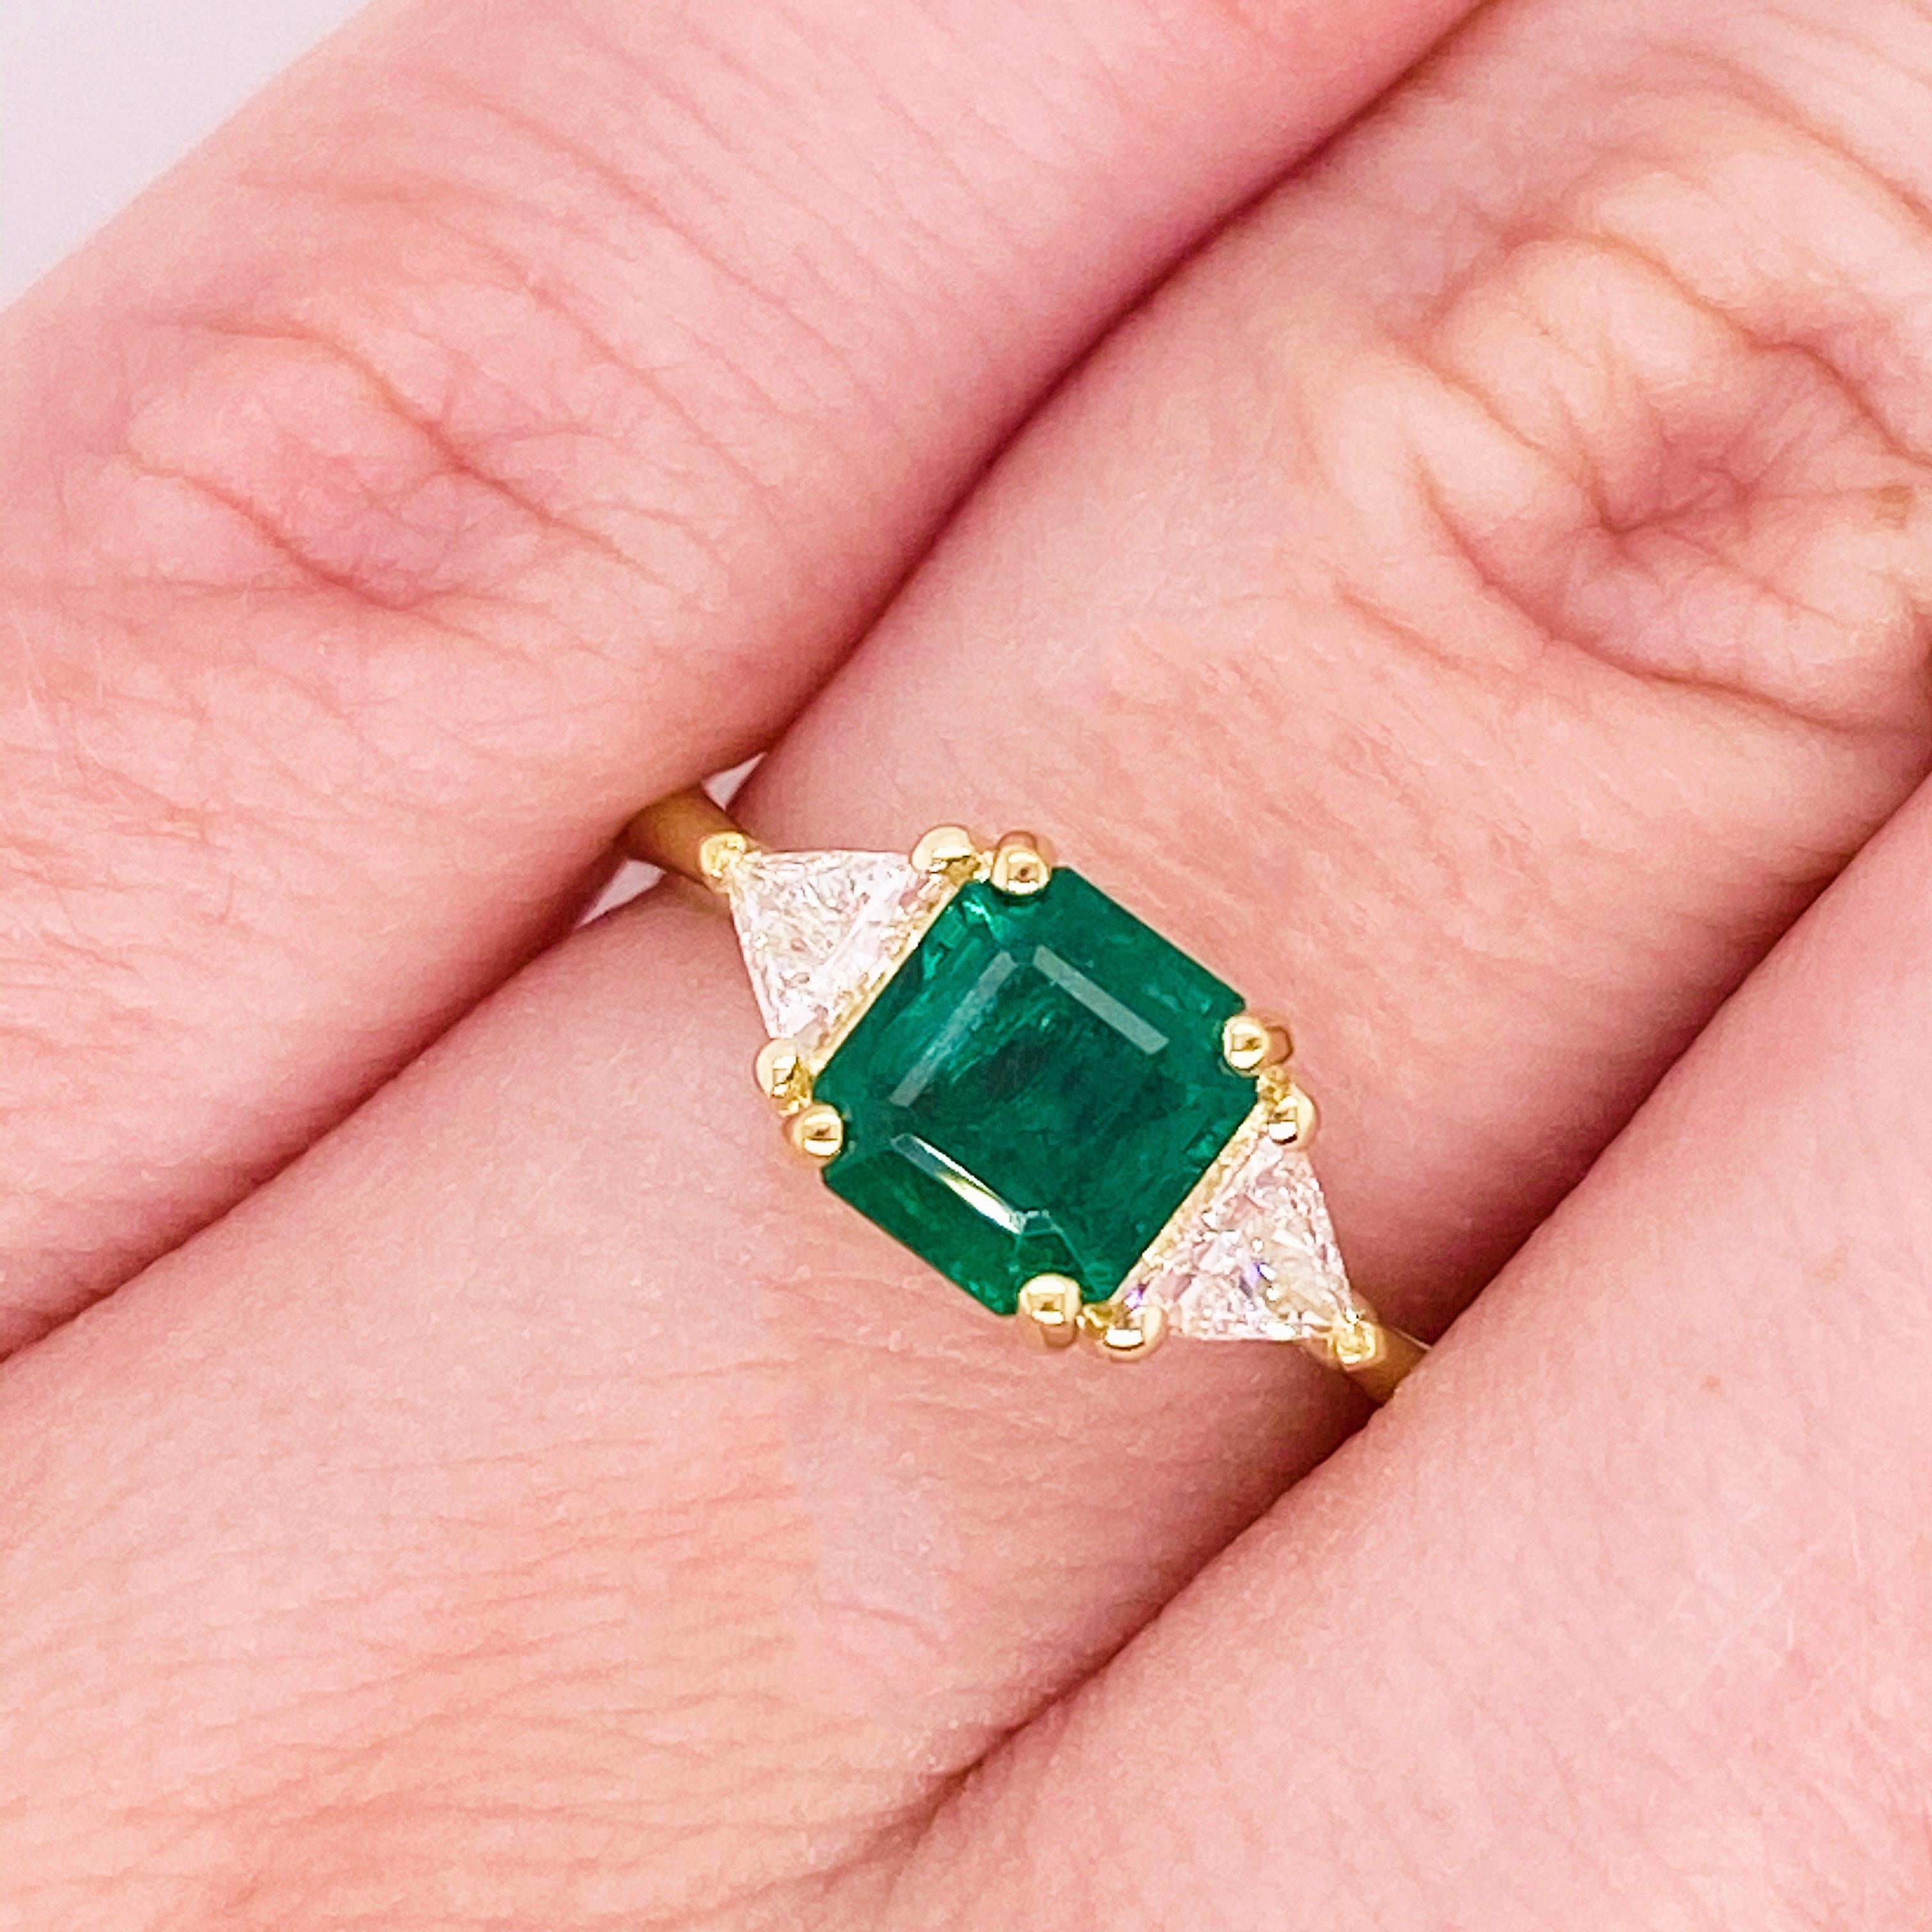 The three stone emerald and diamond ring was designed, cast, and set in our shop!  This stunningly beautiful green emerald surrounded by two gorgeous trillion diamonds set in polished 18k yellow gold provides a look that is very modern and classic